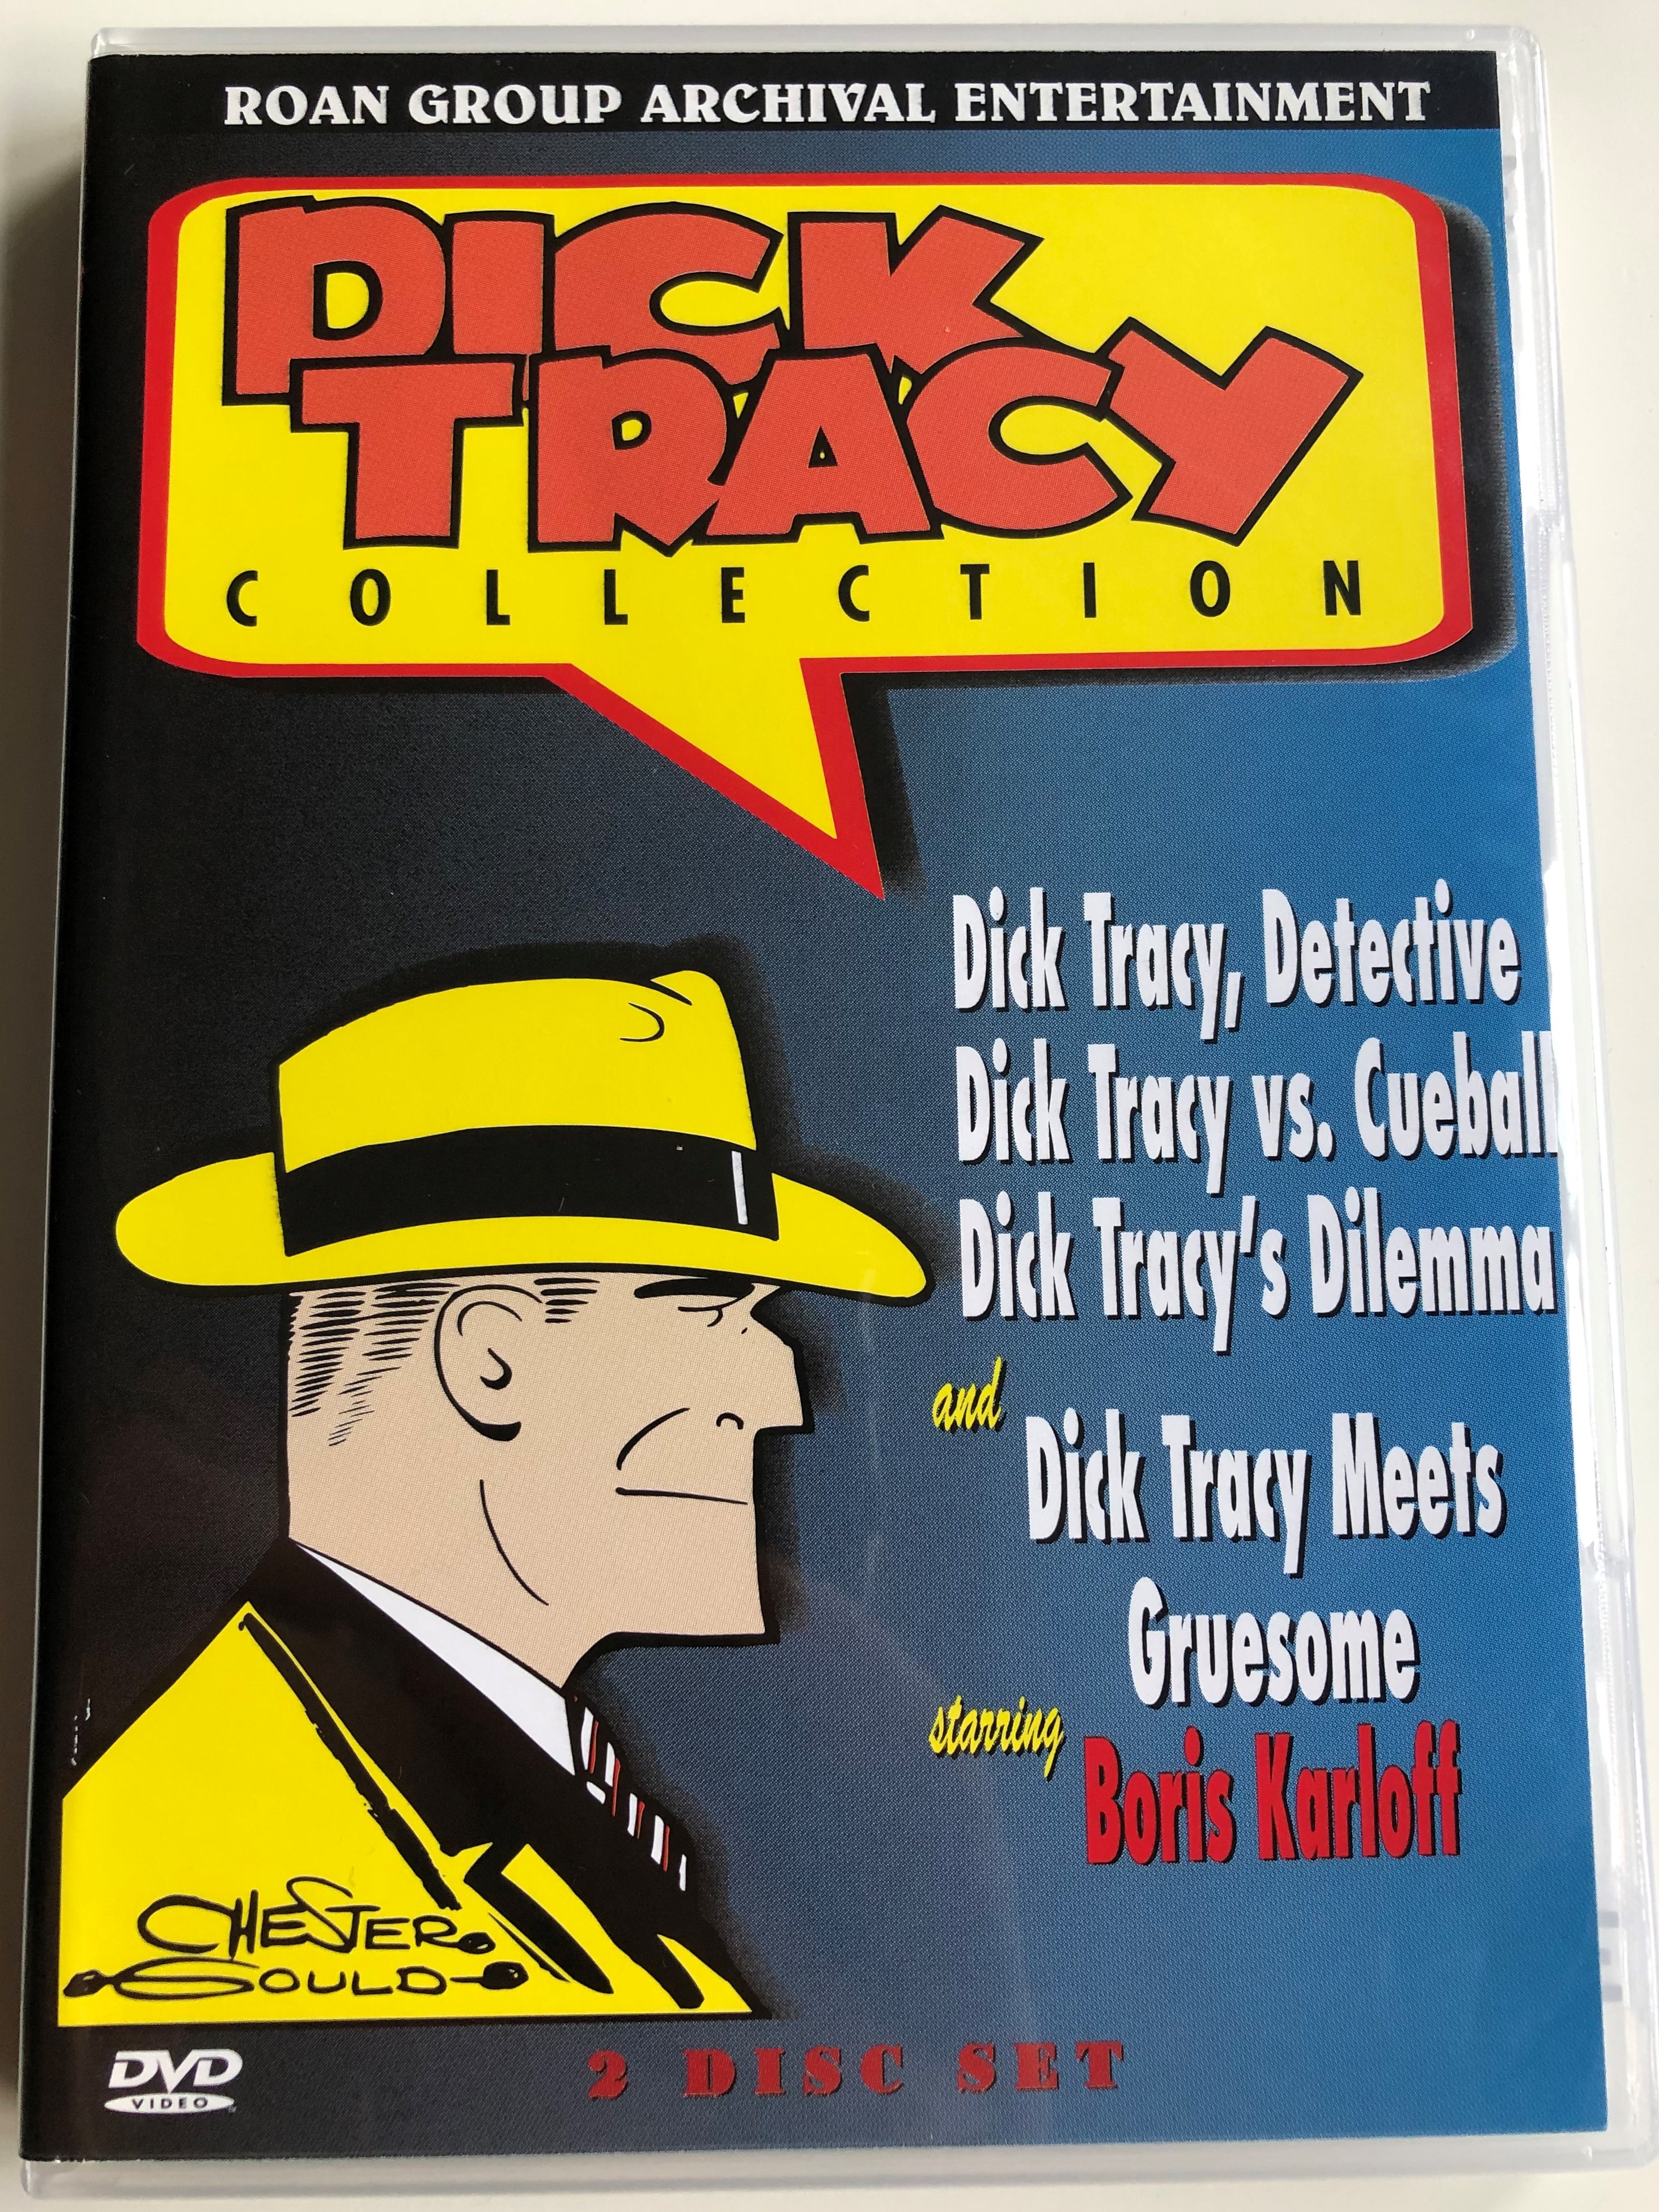 Dick Tracy Collection DVD 2 Disc Set / Dick Tracy vs Cueball, Dilemma - Dick Tracy Meets Gruesome / Starring Boris Karloff / Roan AED-2012 photo